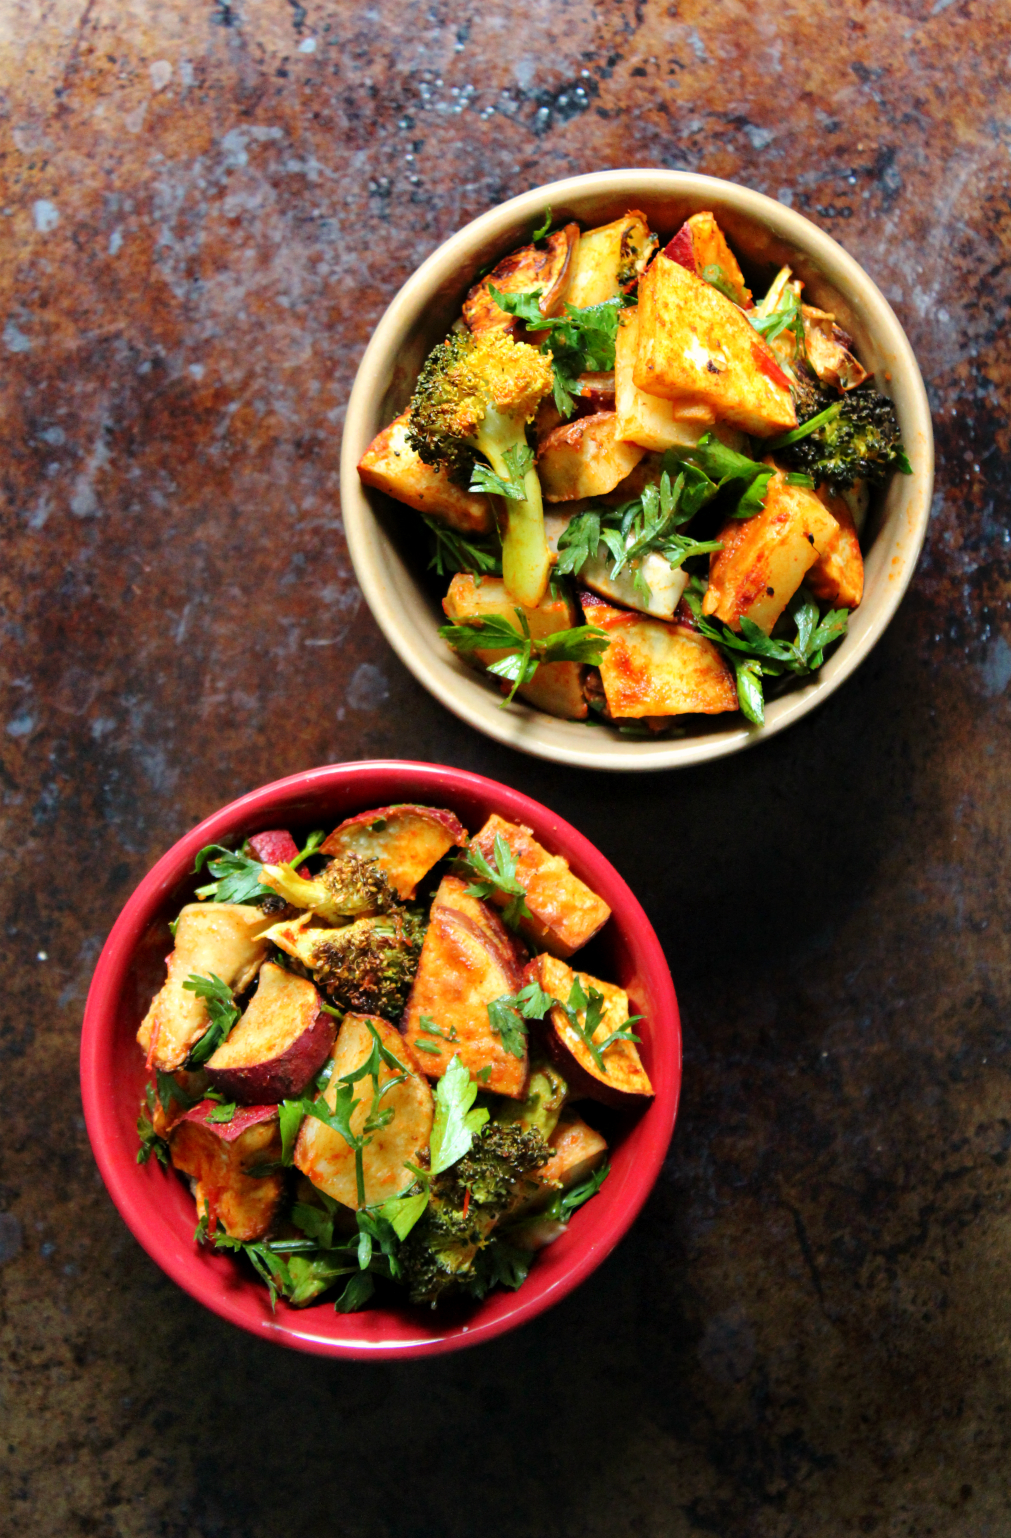 Harissa Potato Salad | Strength and Sunshine @RebeccaGF666 Two types of potatoes, broccoli, and eggplant roasted to perfection and paired with a smoky and spicy harissa sauce. A harissa potato salad, gluten-free, vegan, and paleo, that will elevate you bland dinner side dish to an all new level!